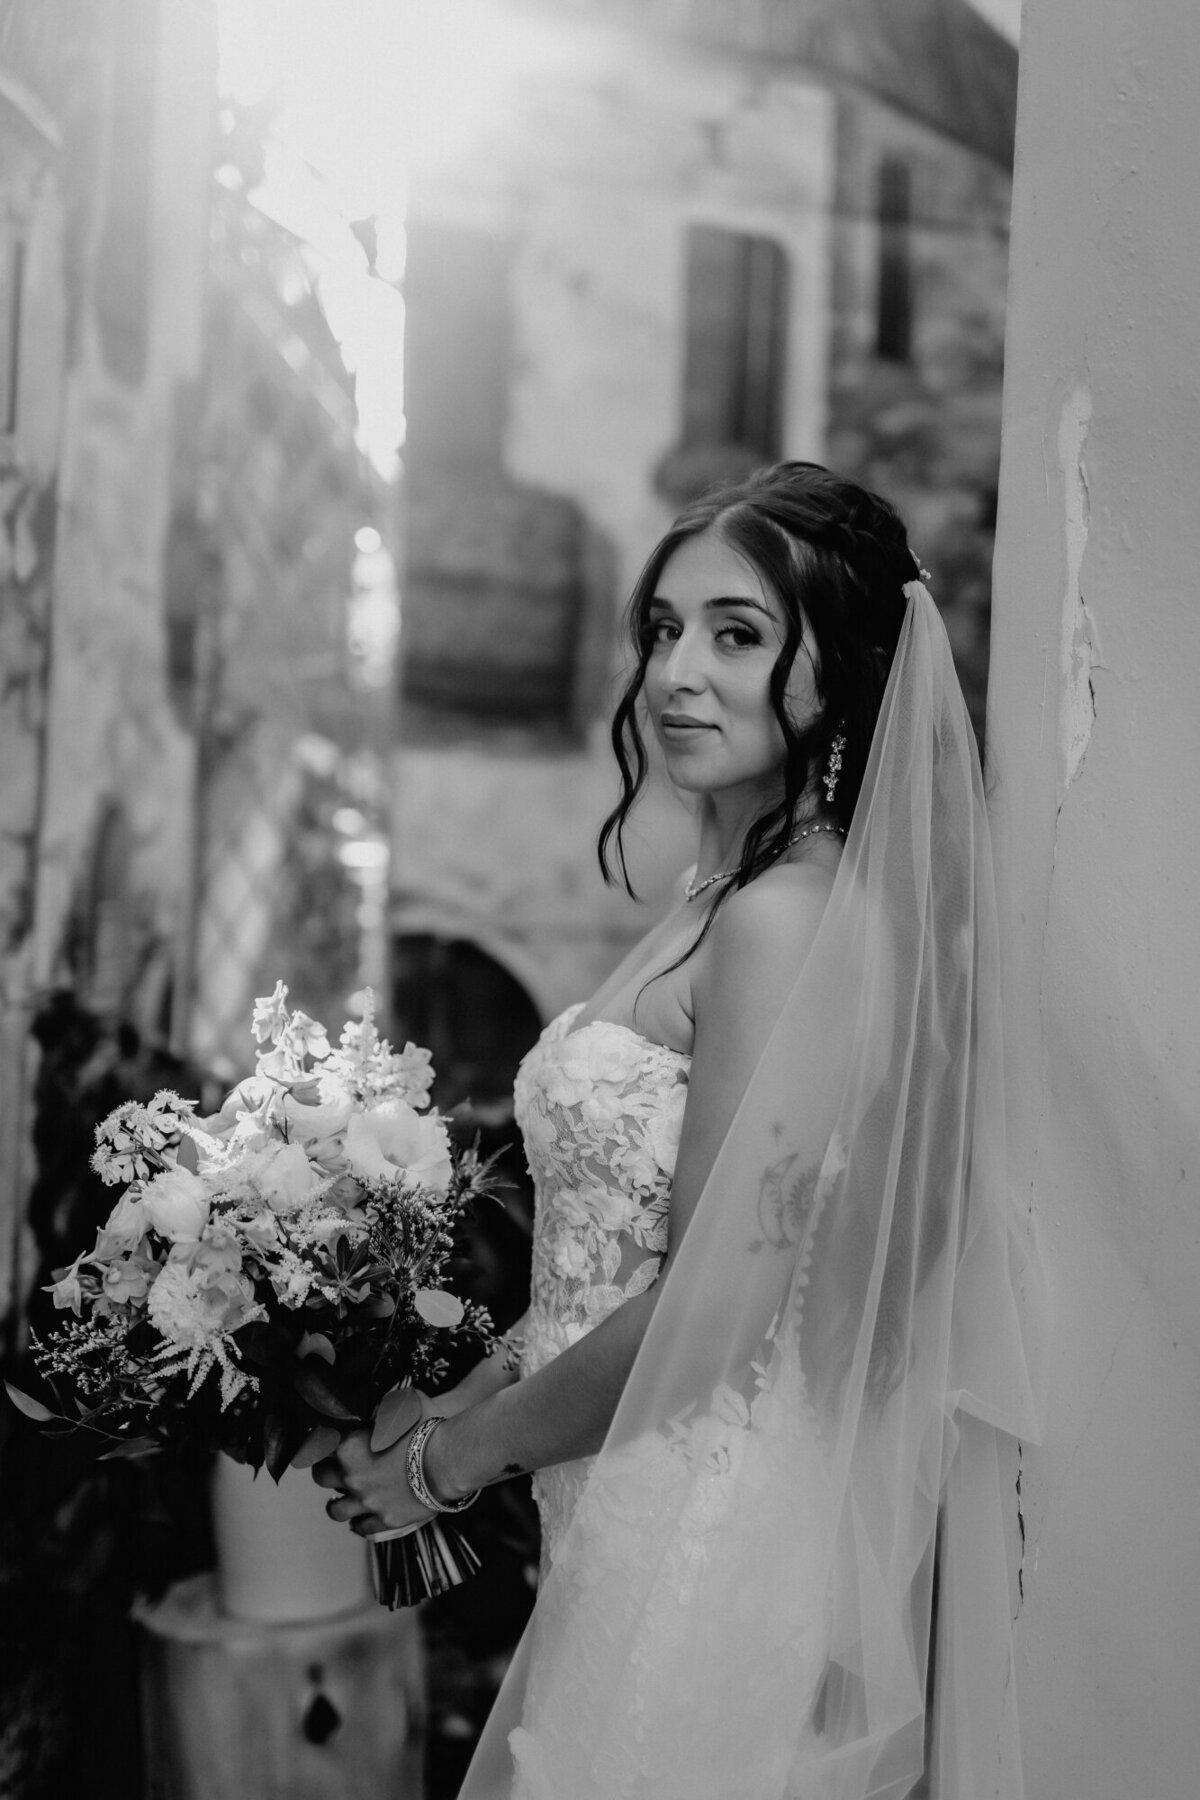 Black and white photo of the bride leaning agaist the wall holding her bouquet and looking at the camera over her shoulder.